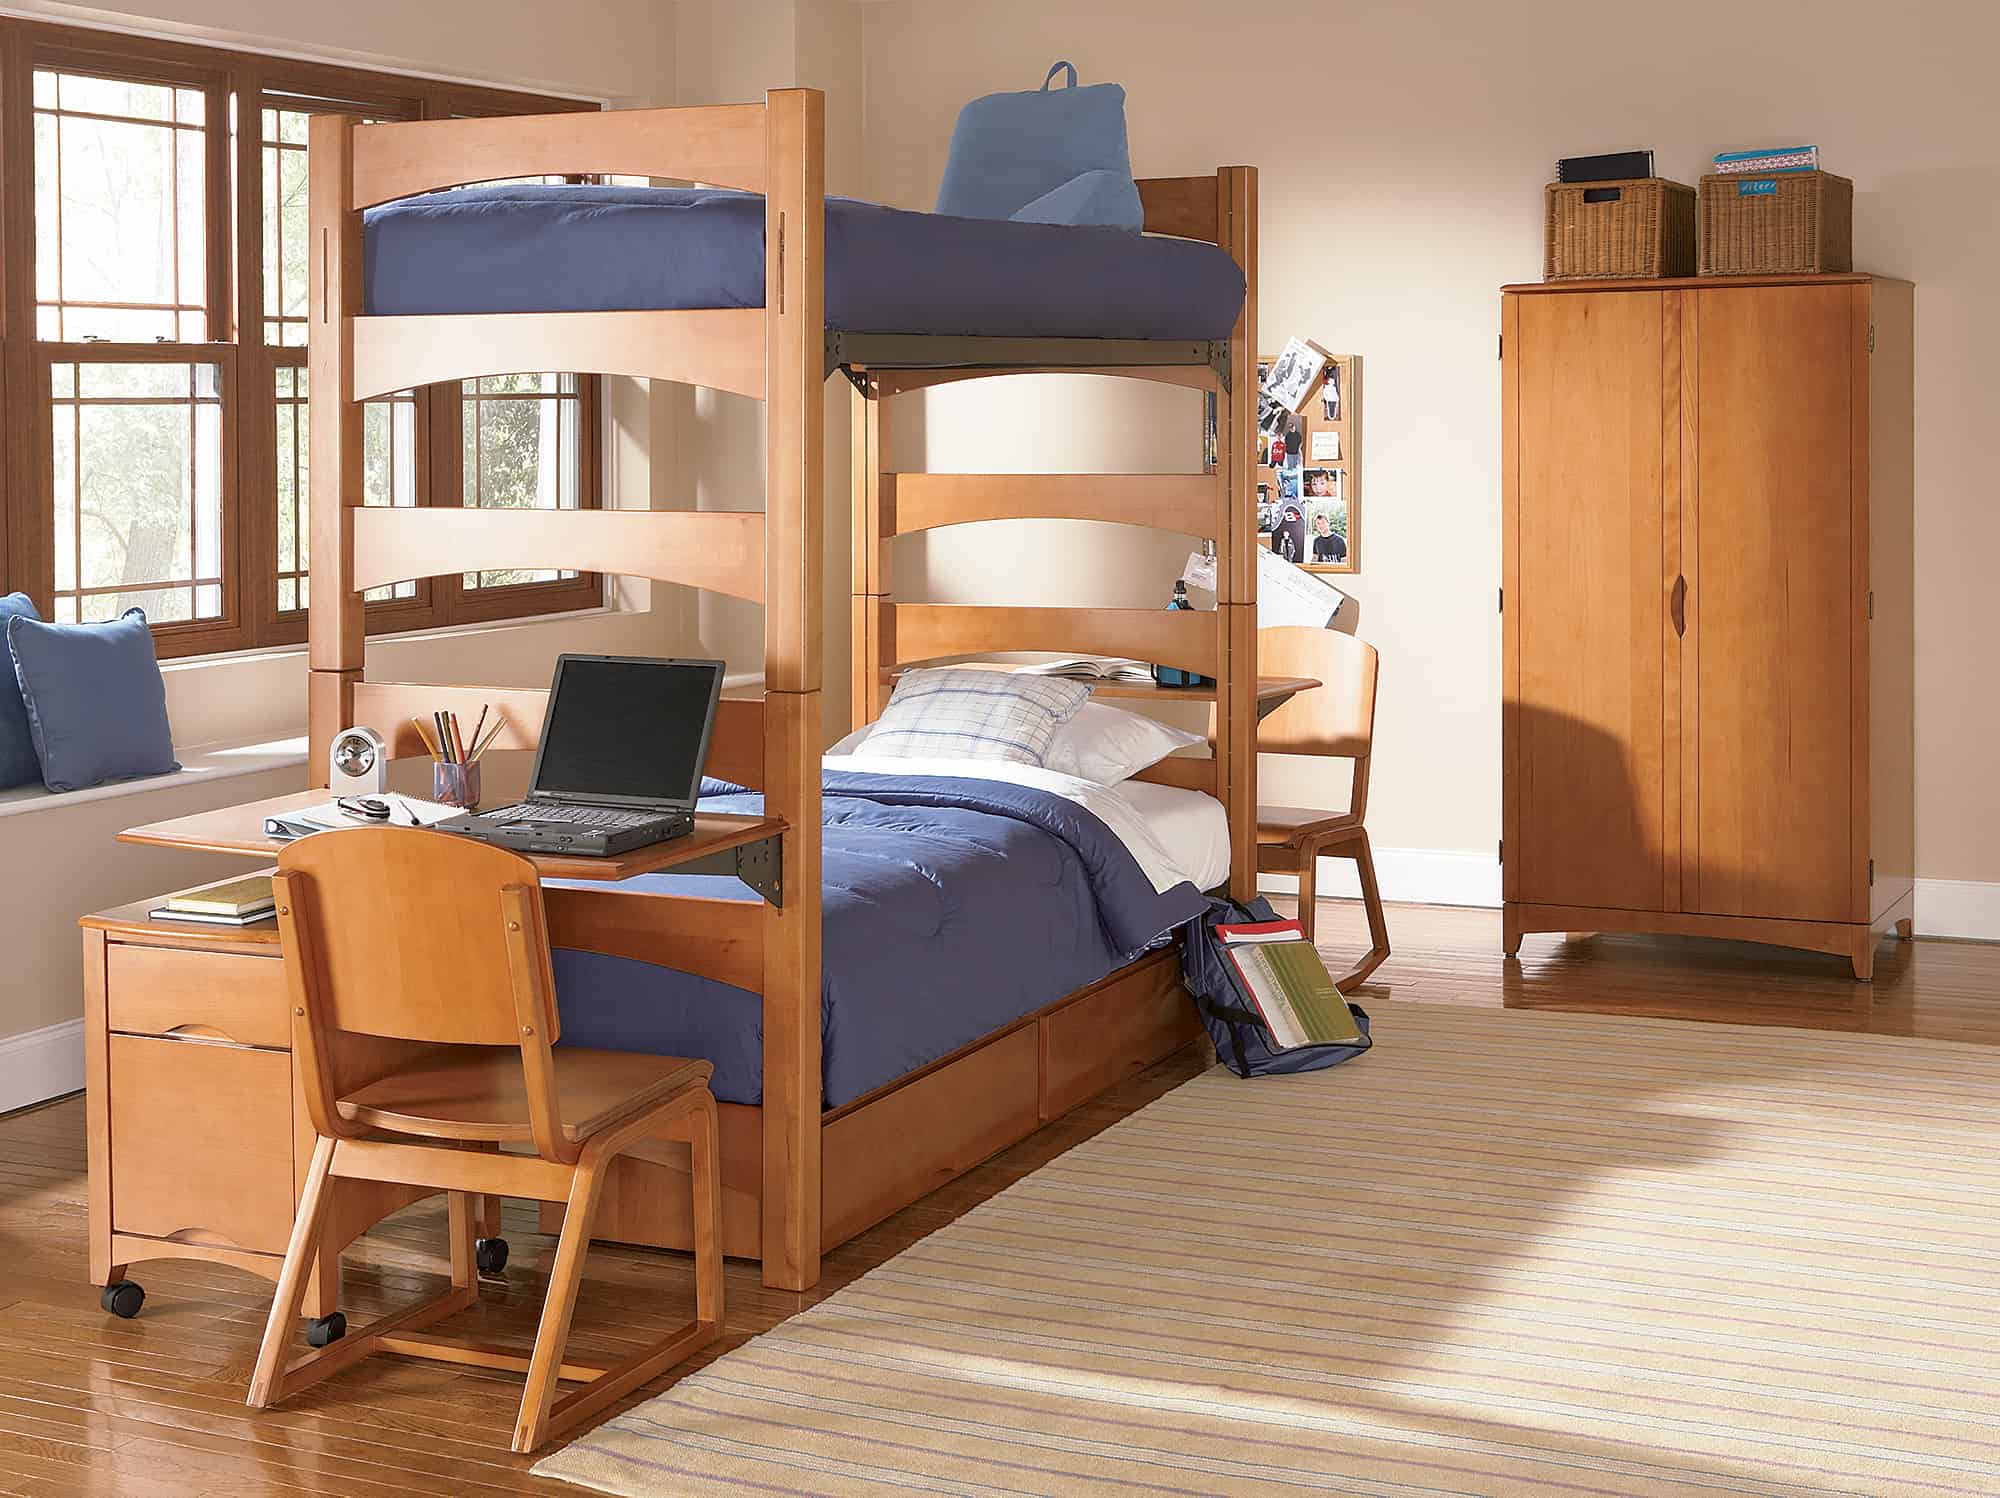 Dorm room with bunk beds shown